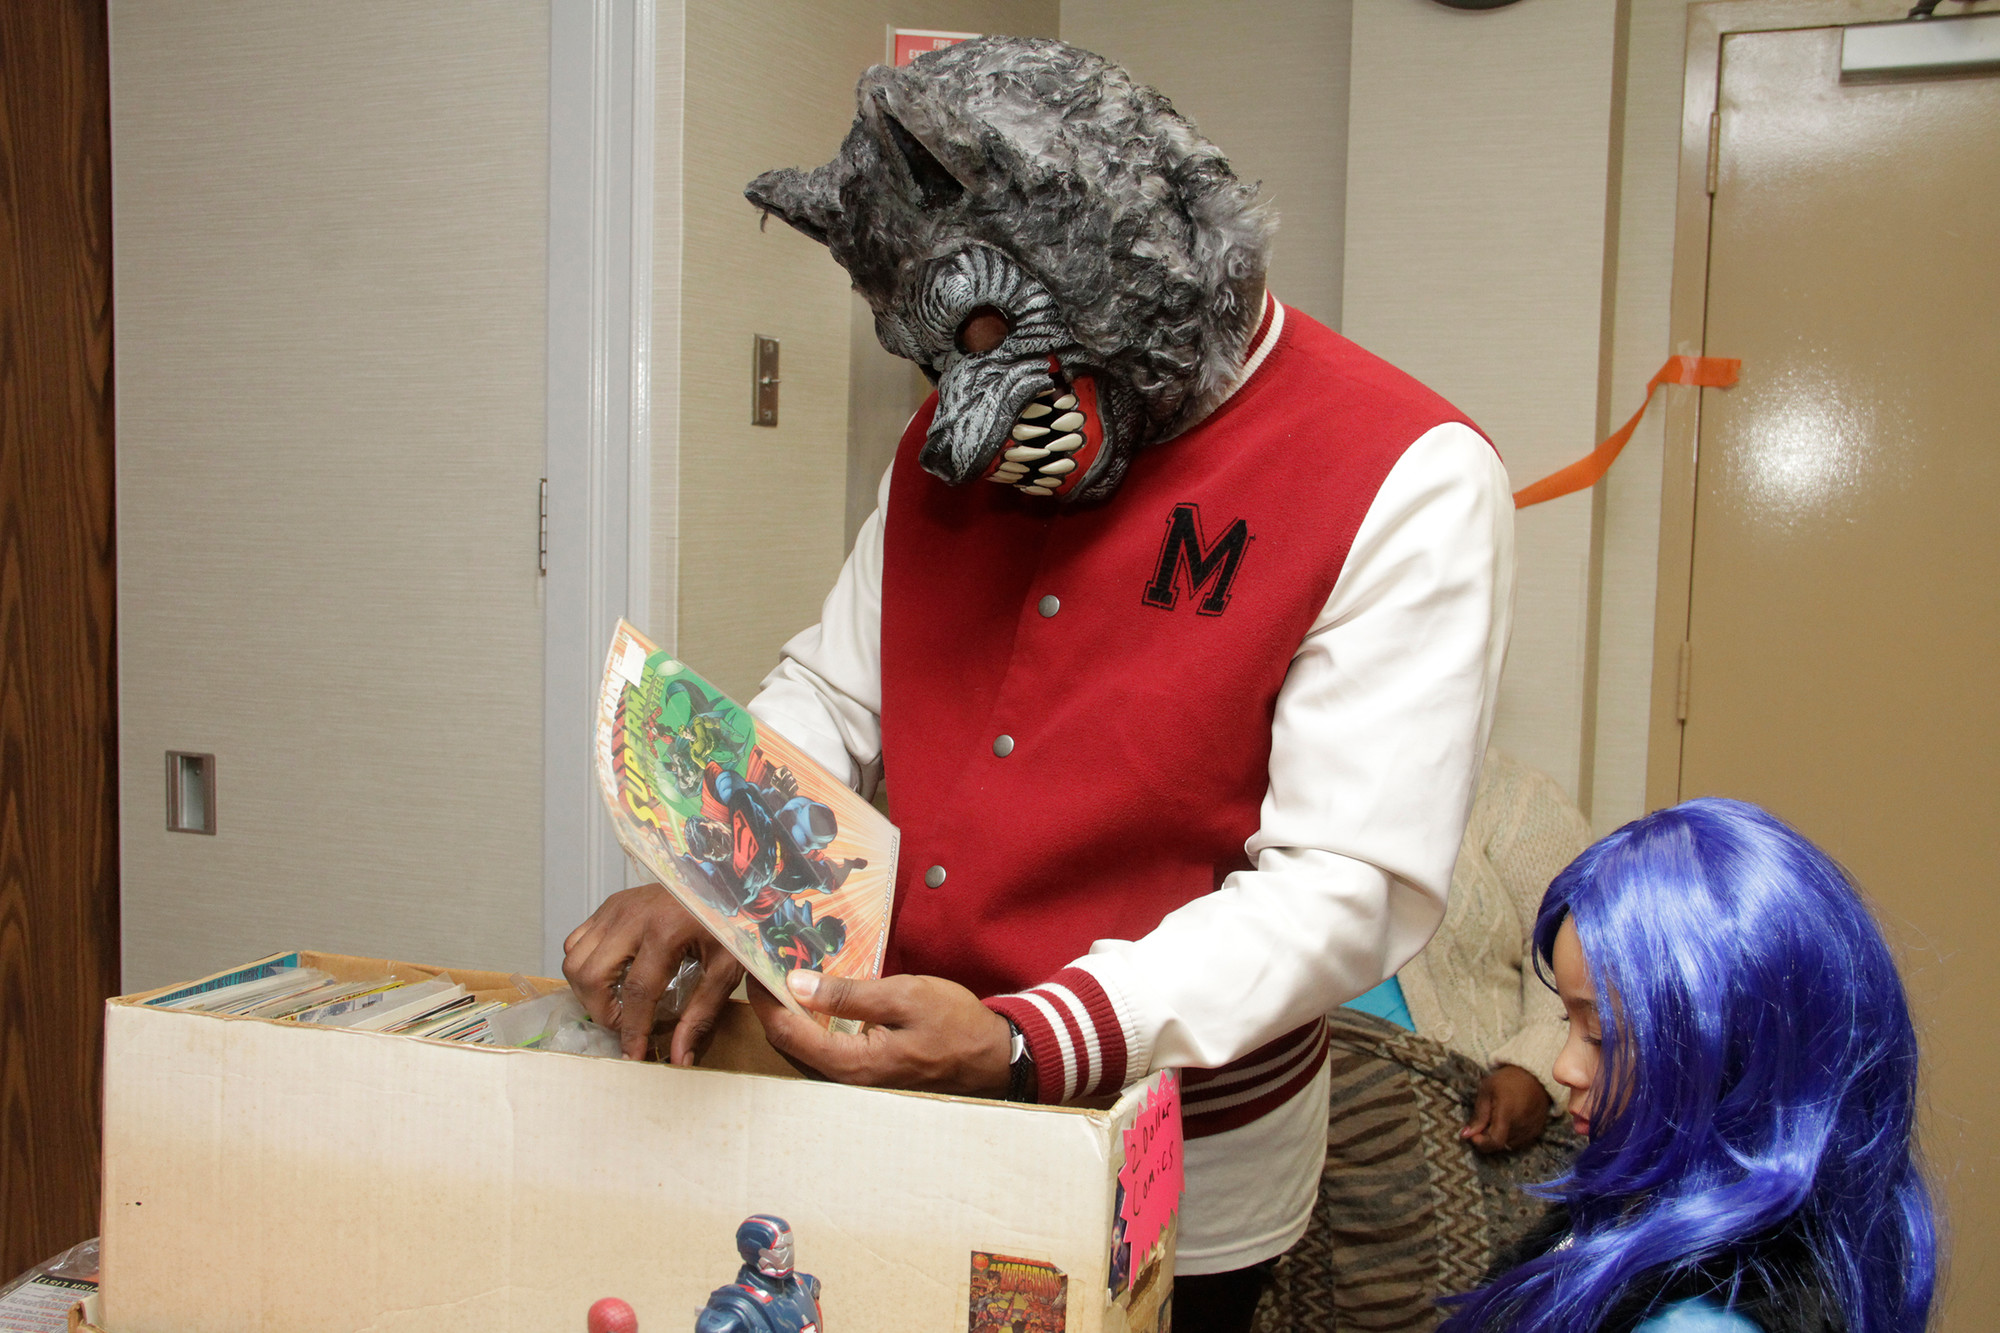 Teen wolf Michael Cameron and his daughter Madison browsed comic books.